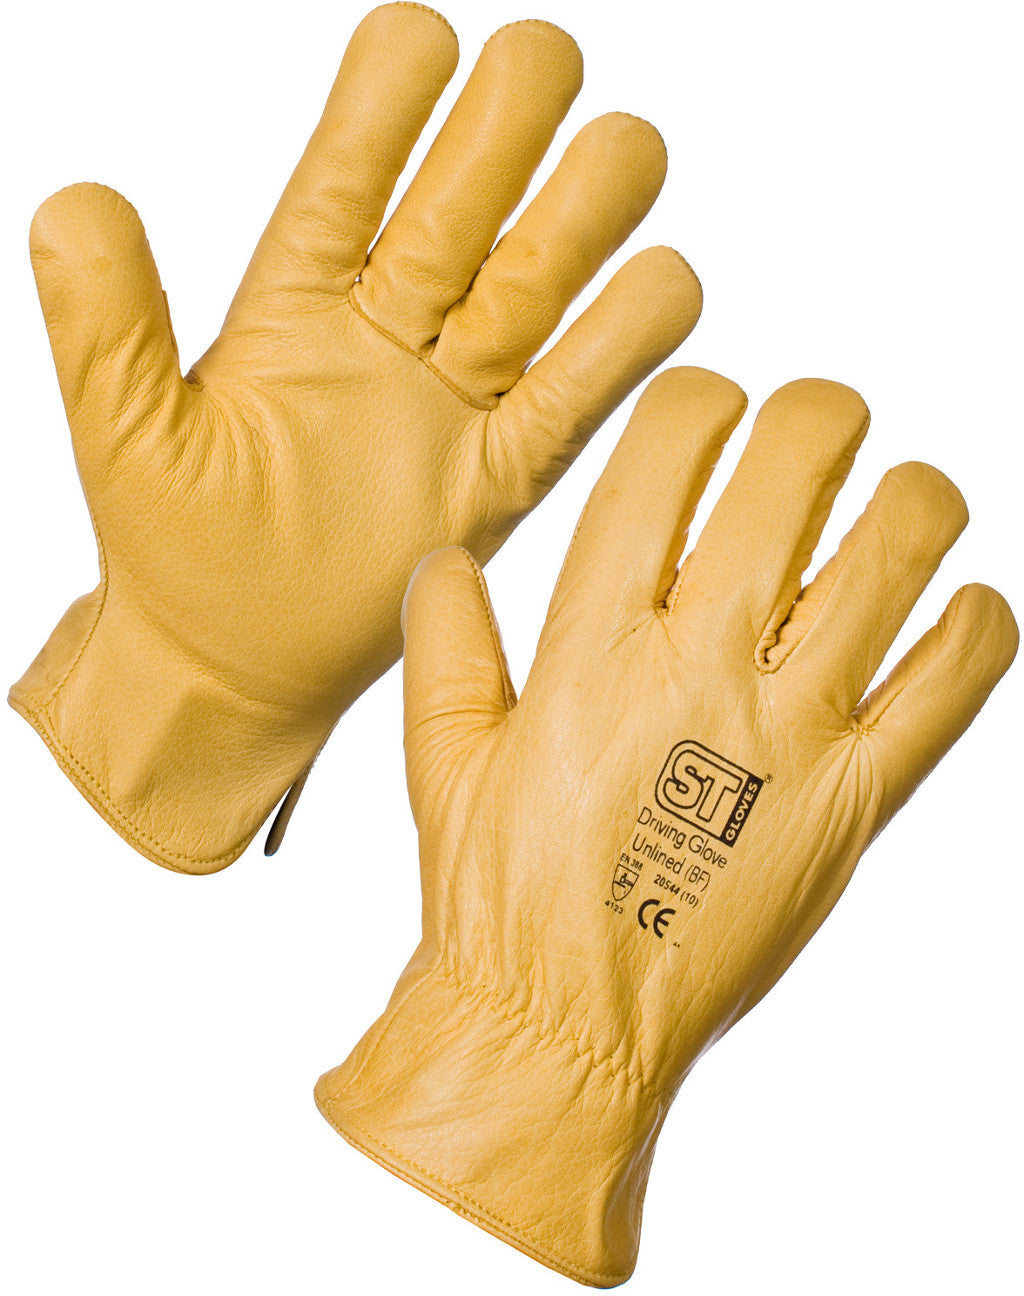 SuperTouch Driving Gloves - Unlined